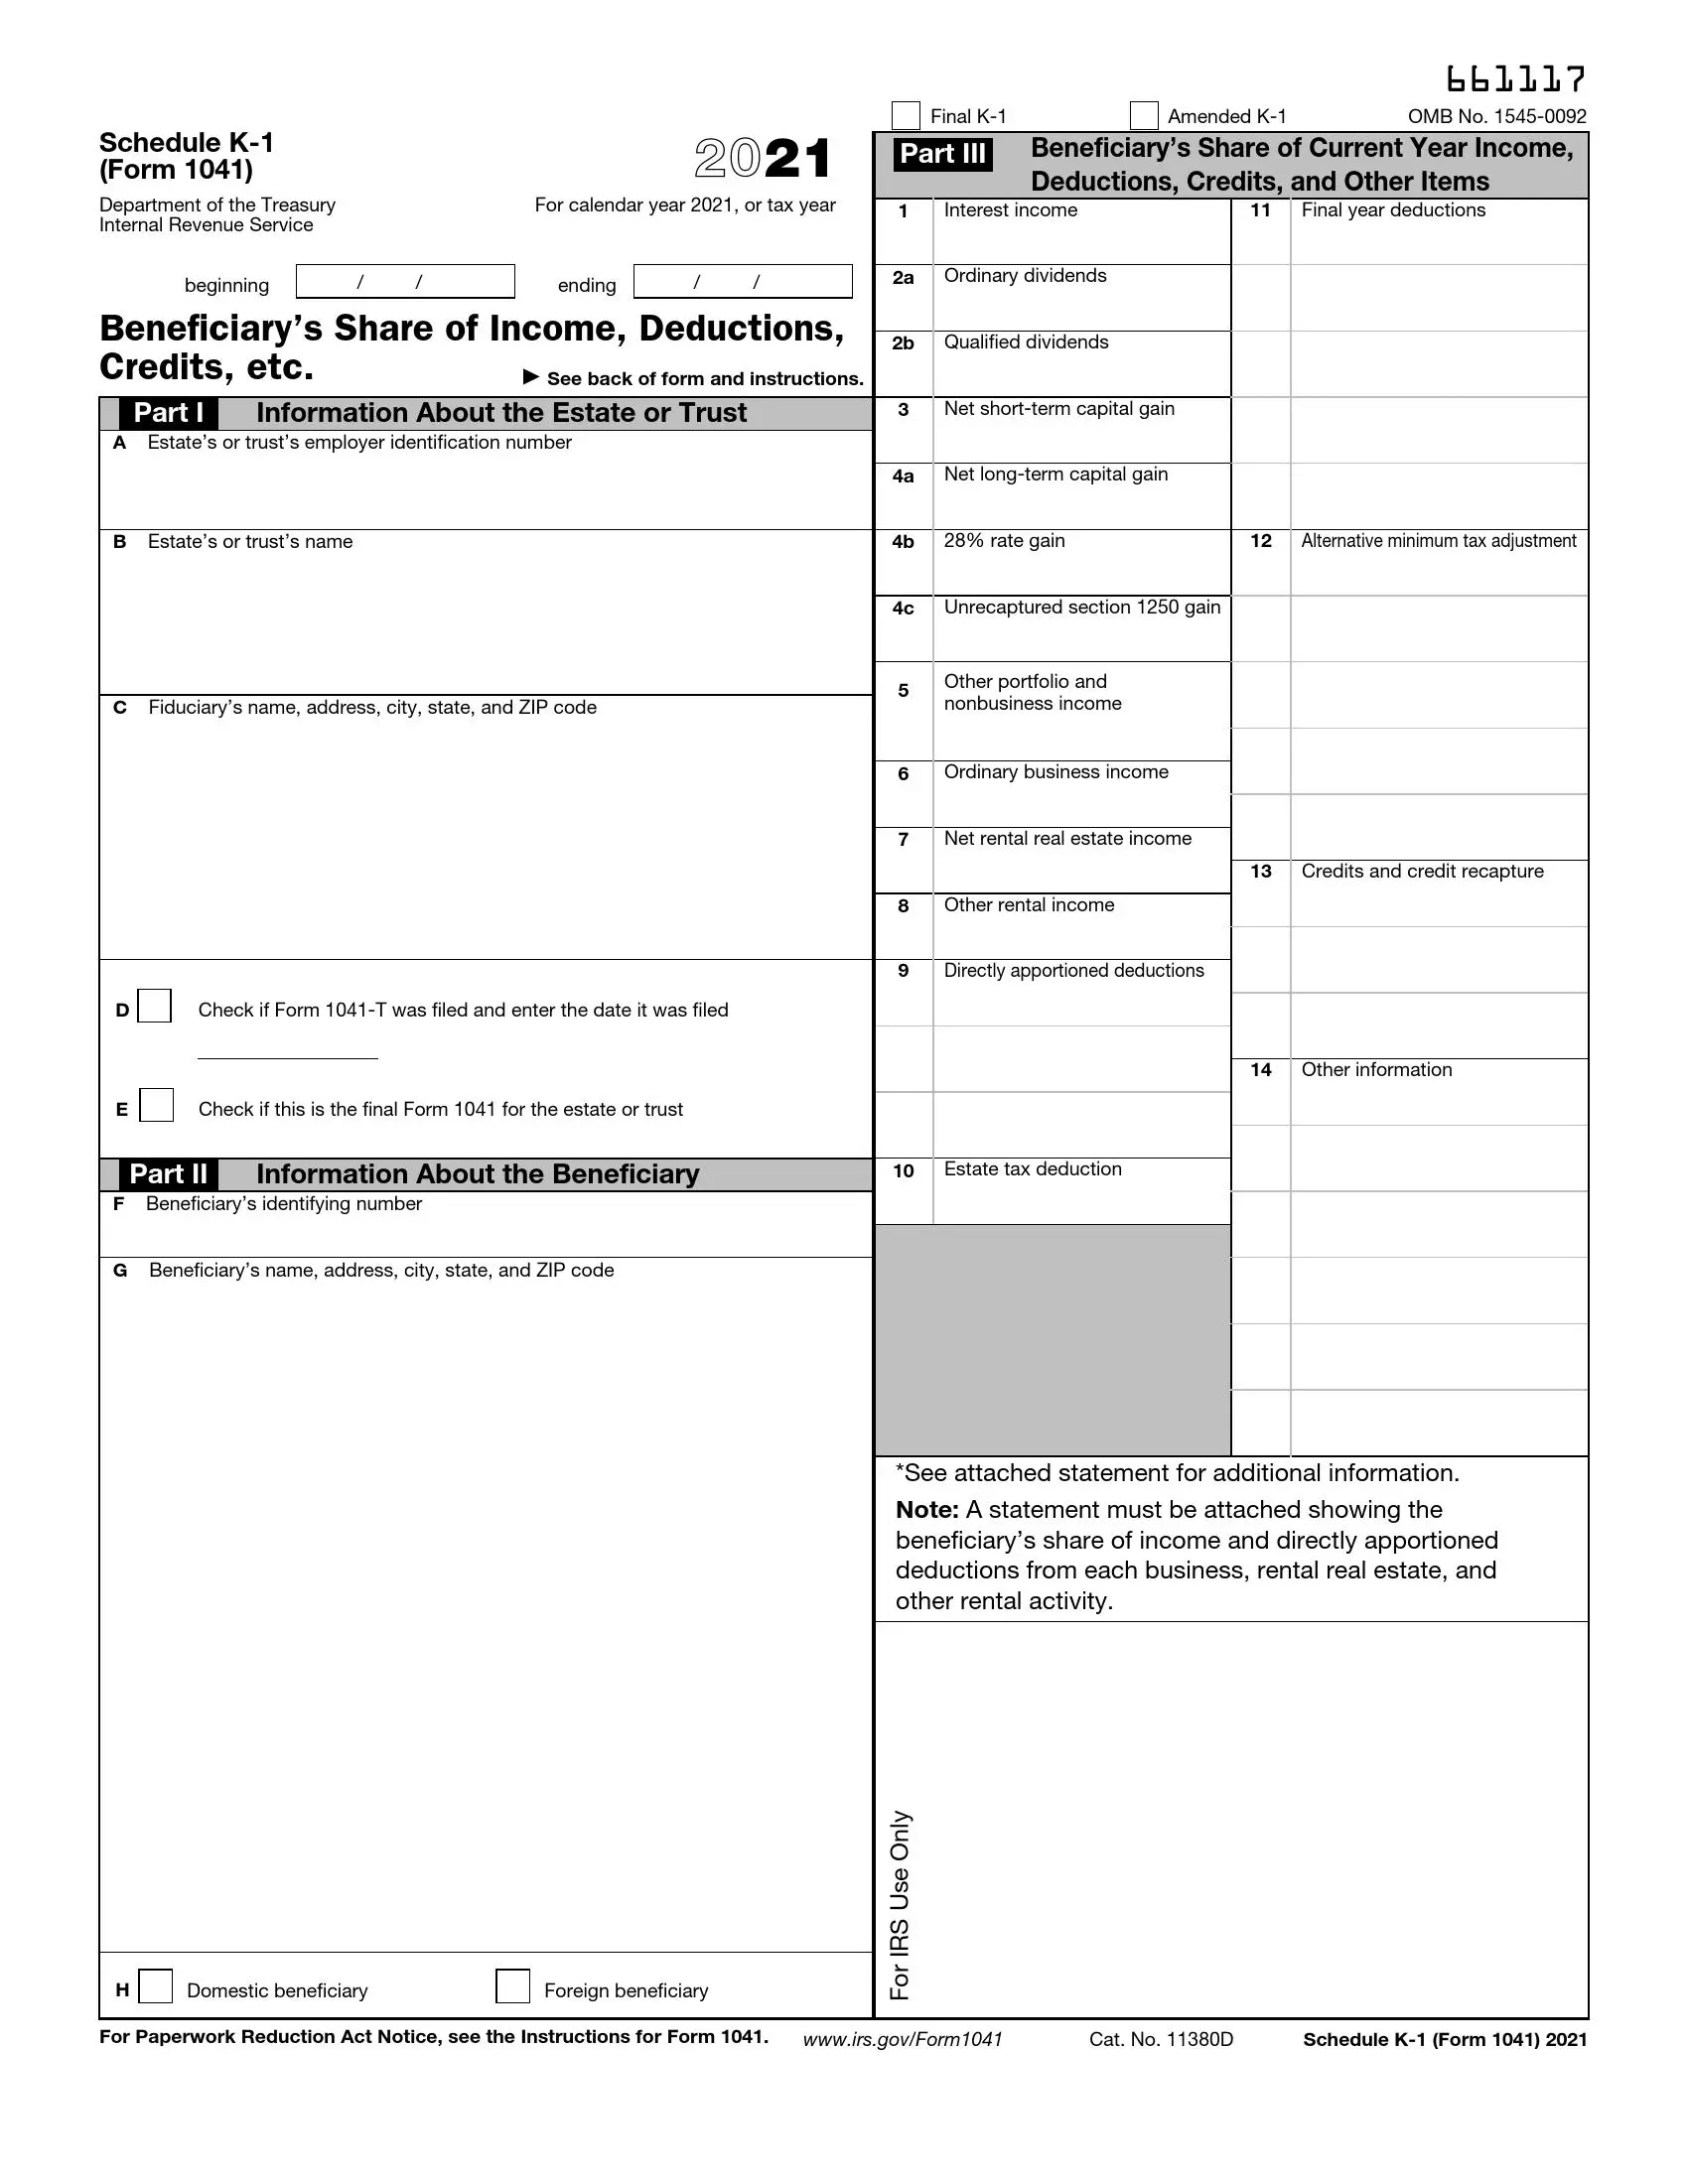 irs schedule k 1 form 1041 2021 preview